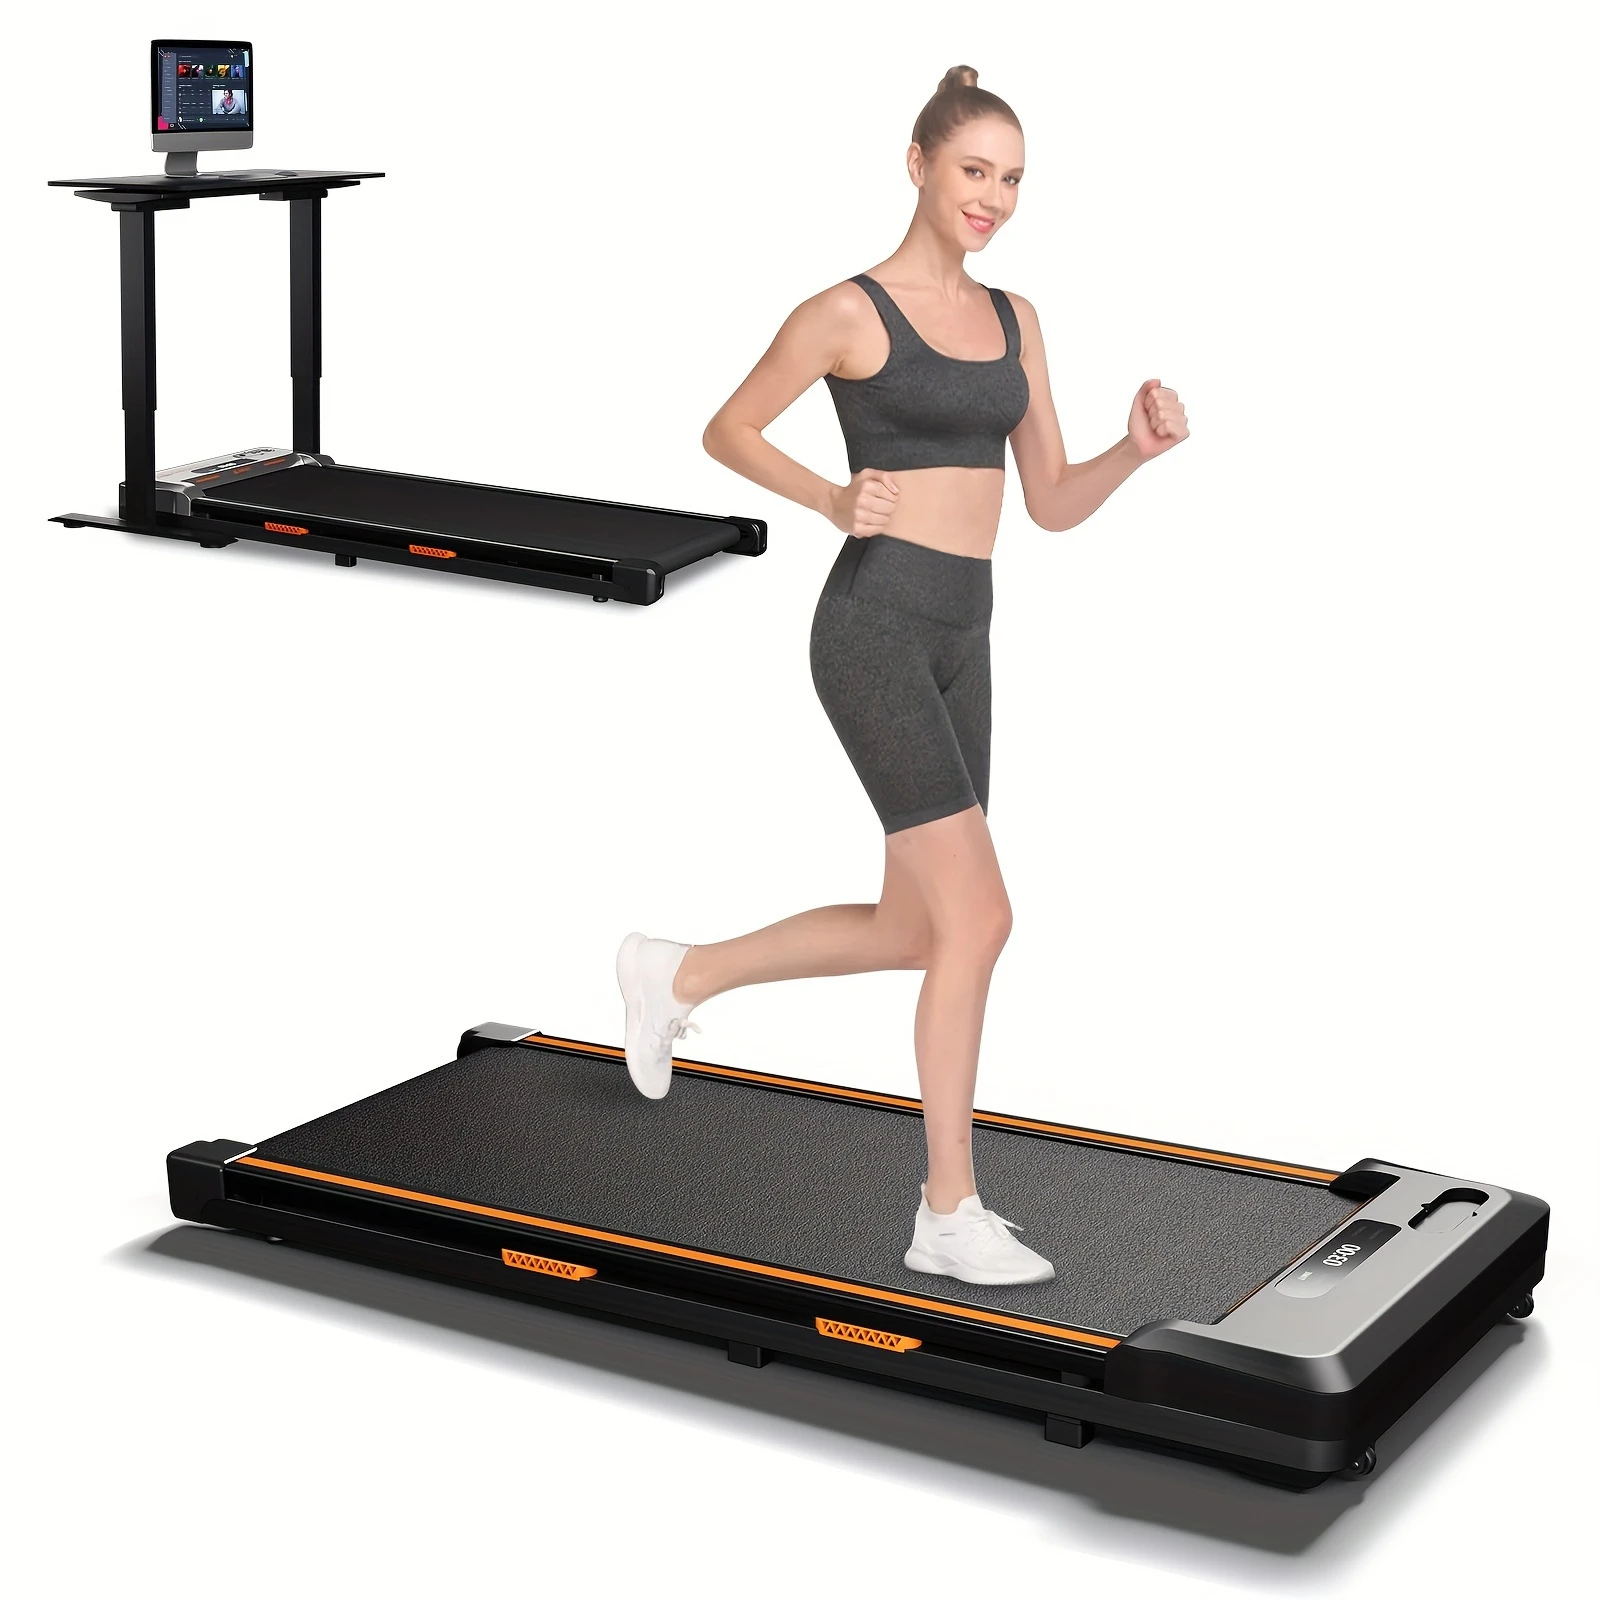 

1pc 2-in-1 Compact Walk & Jog Under Desk Treadmill – Ideal for Home Office Fitness, Portable Design with Remote Control Lanyar